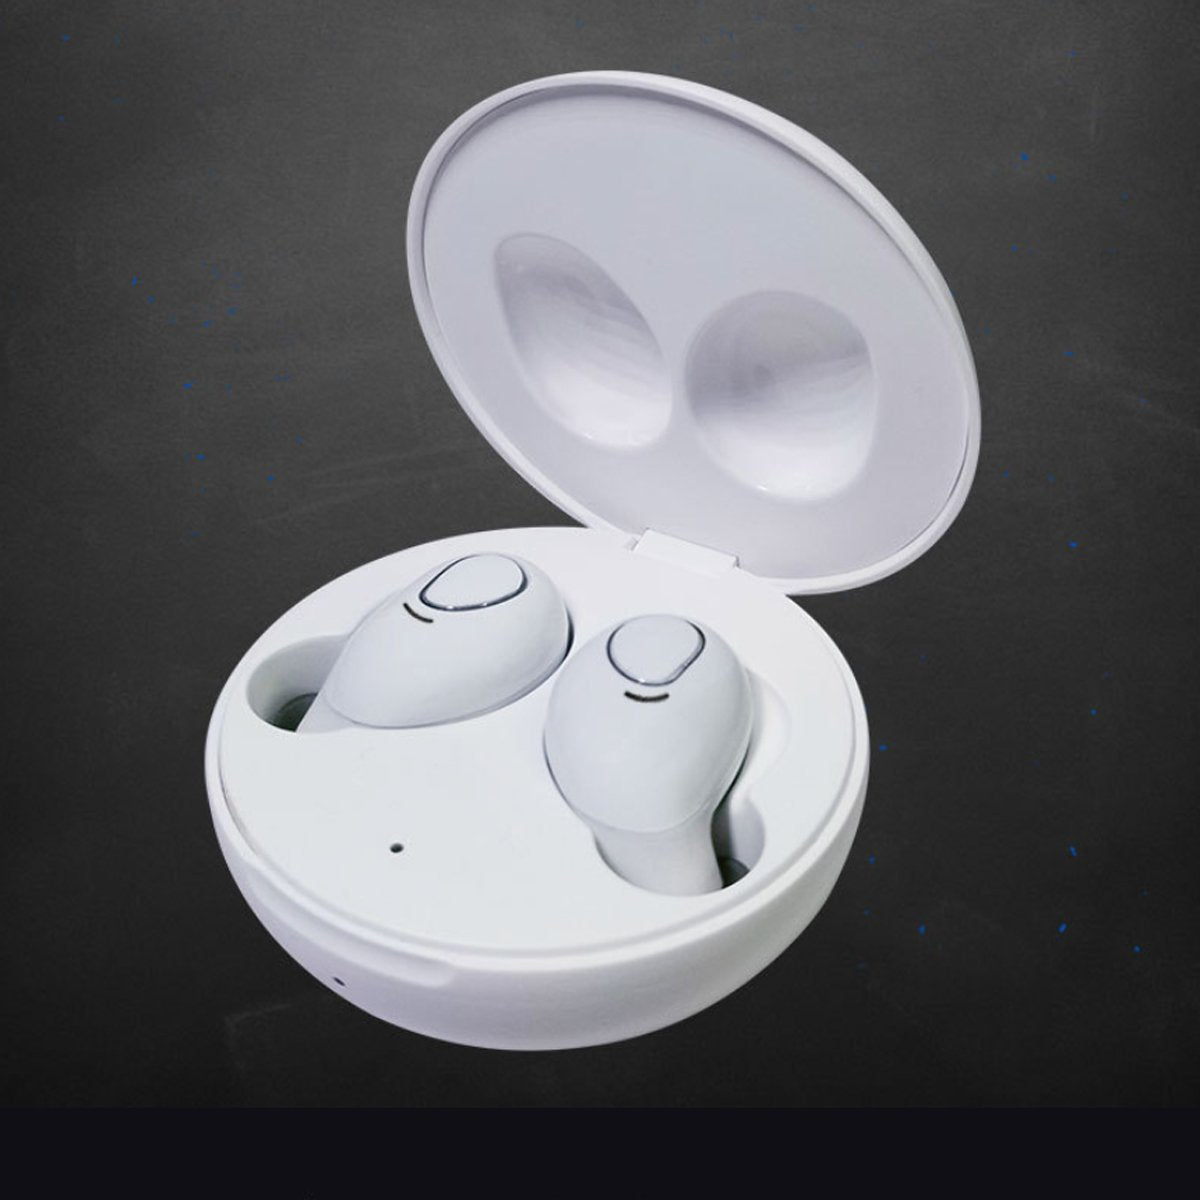 Bluetooth Earbuds With Wireless Charging Pad | TechTonic® - Stringspeed